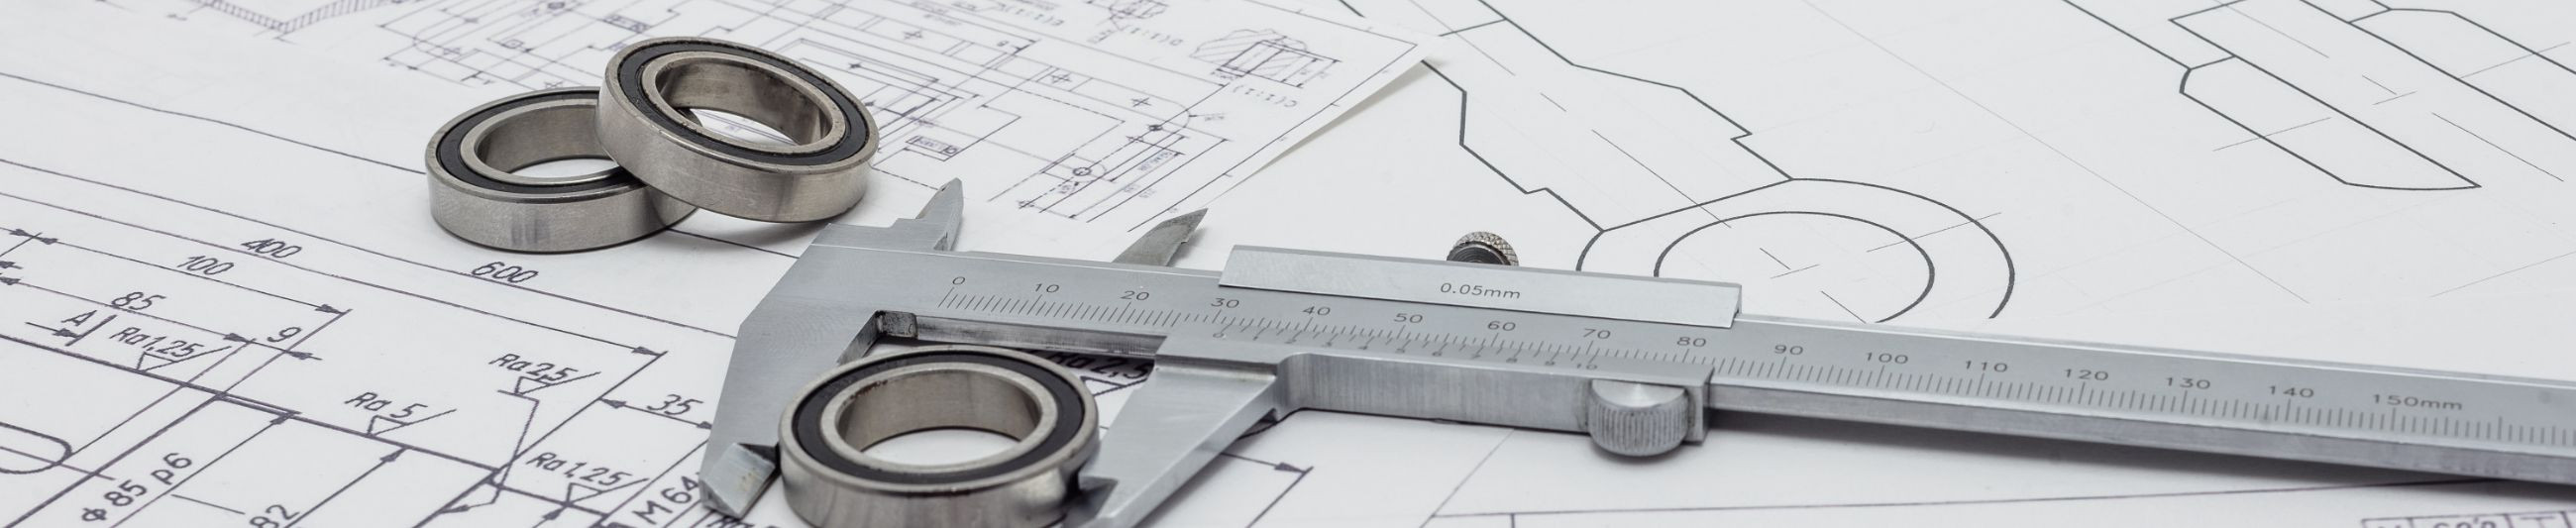 building permits, building permit, the Law of Buildings, Construction documentation, building permit, the buildings act, submission of applications, legal consultation, documentation review, permission tracking